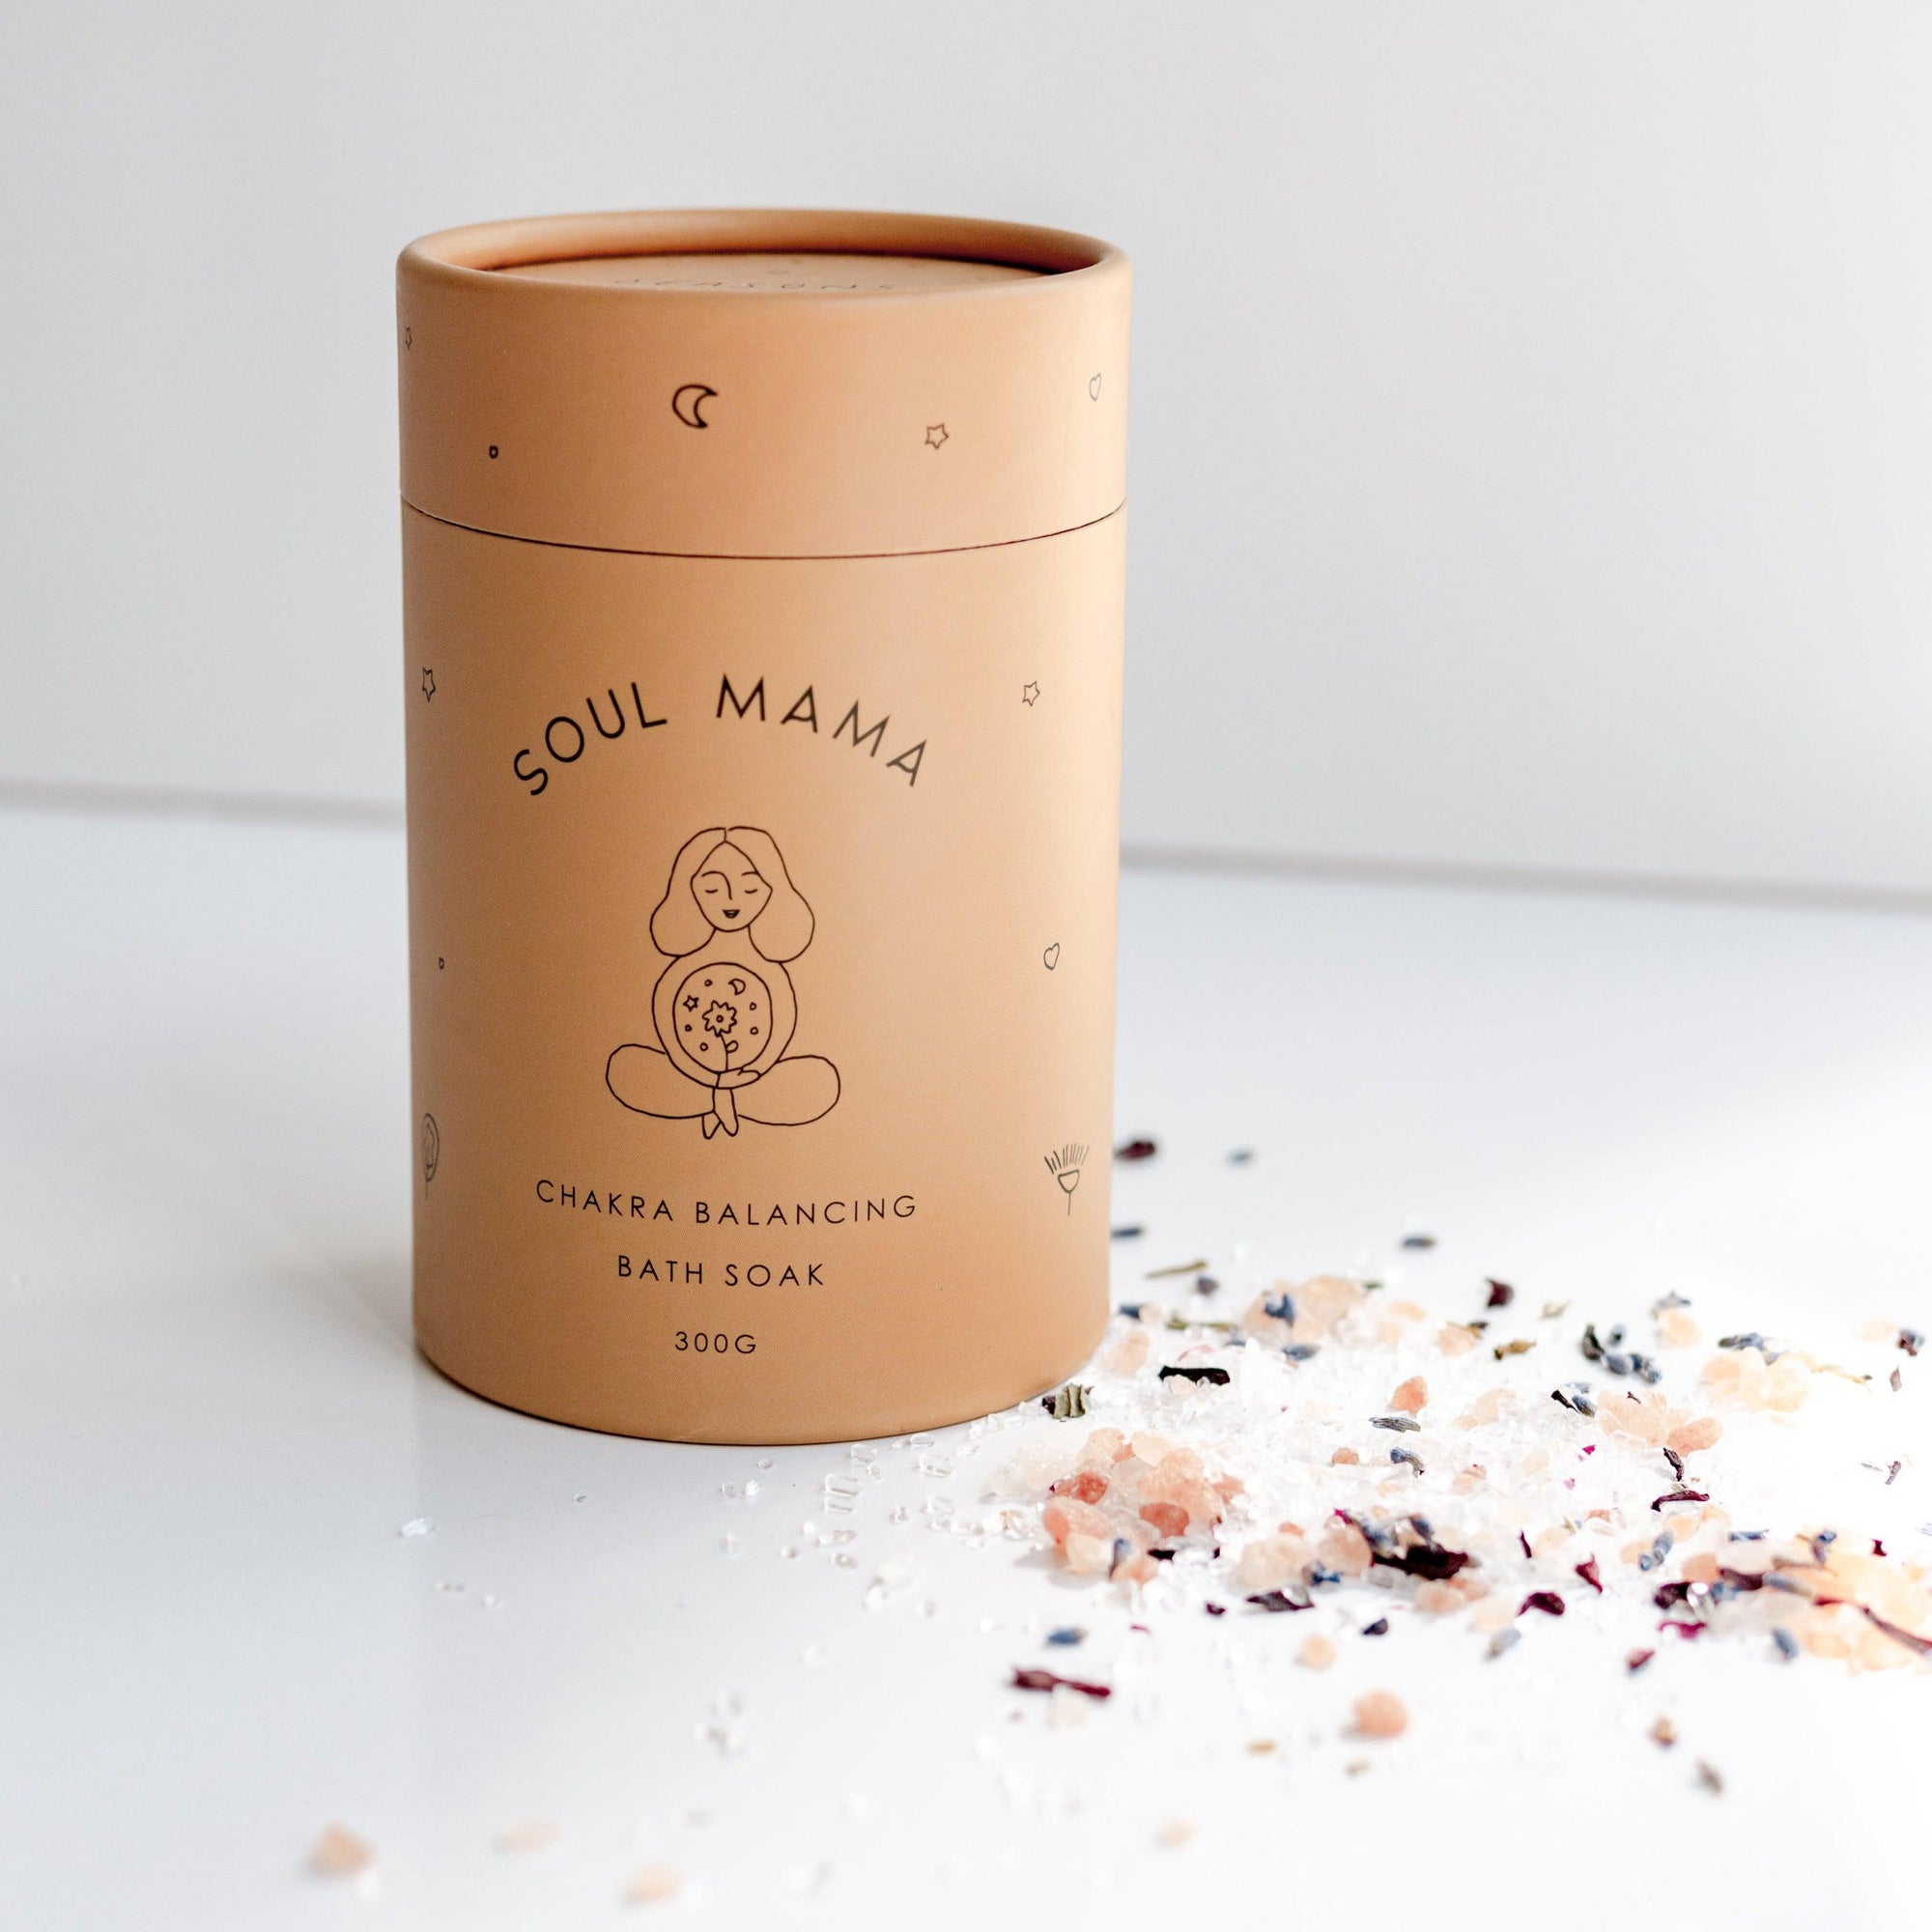 Clear, charge & balance your chakra energy centres with an aromatic blend of dried botanicals & minerals. Believed to have a deeply grounding & detoxifying effect on the body, Pink Himalayan Salt Crystals are used to release negativity & raise your vibrational energy. Bathe with intention & revitalise the spirit in a nourishing self-care ritual.